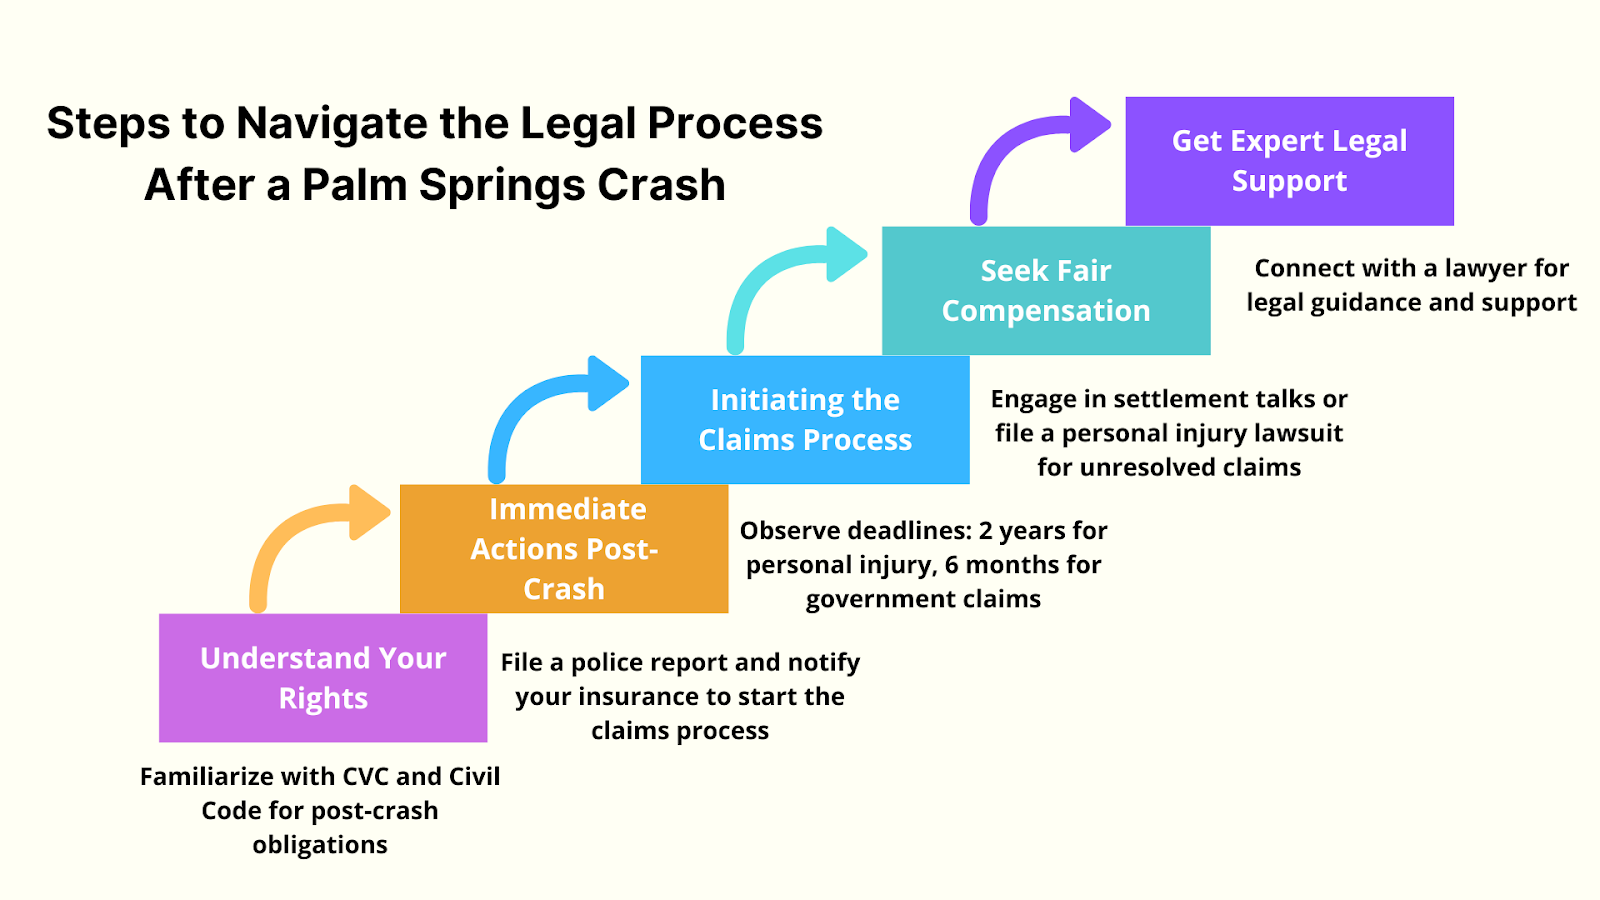 Steps to Navigate the Legal Process After a Palm Springs Crash